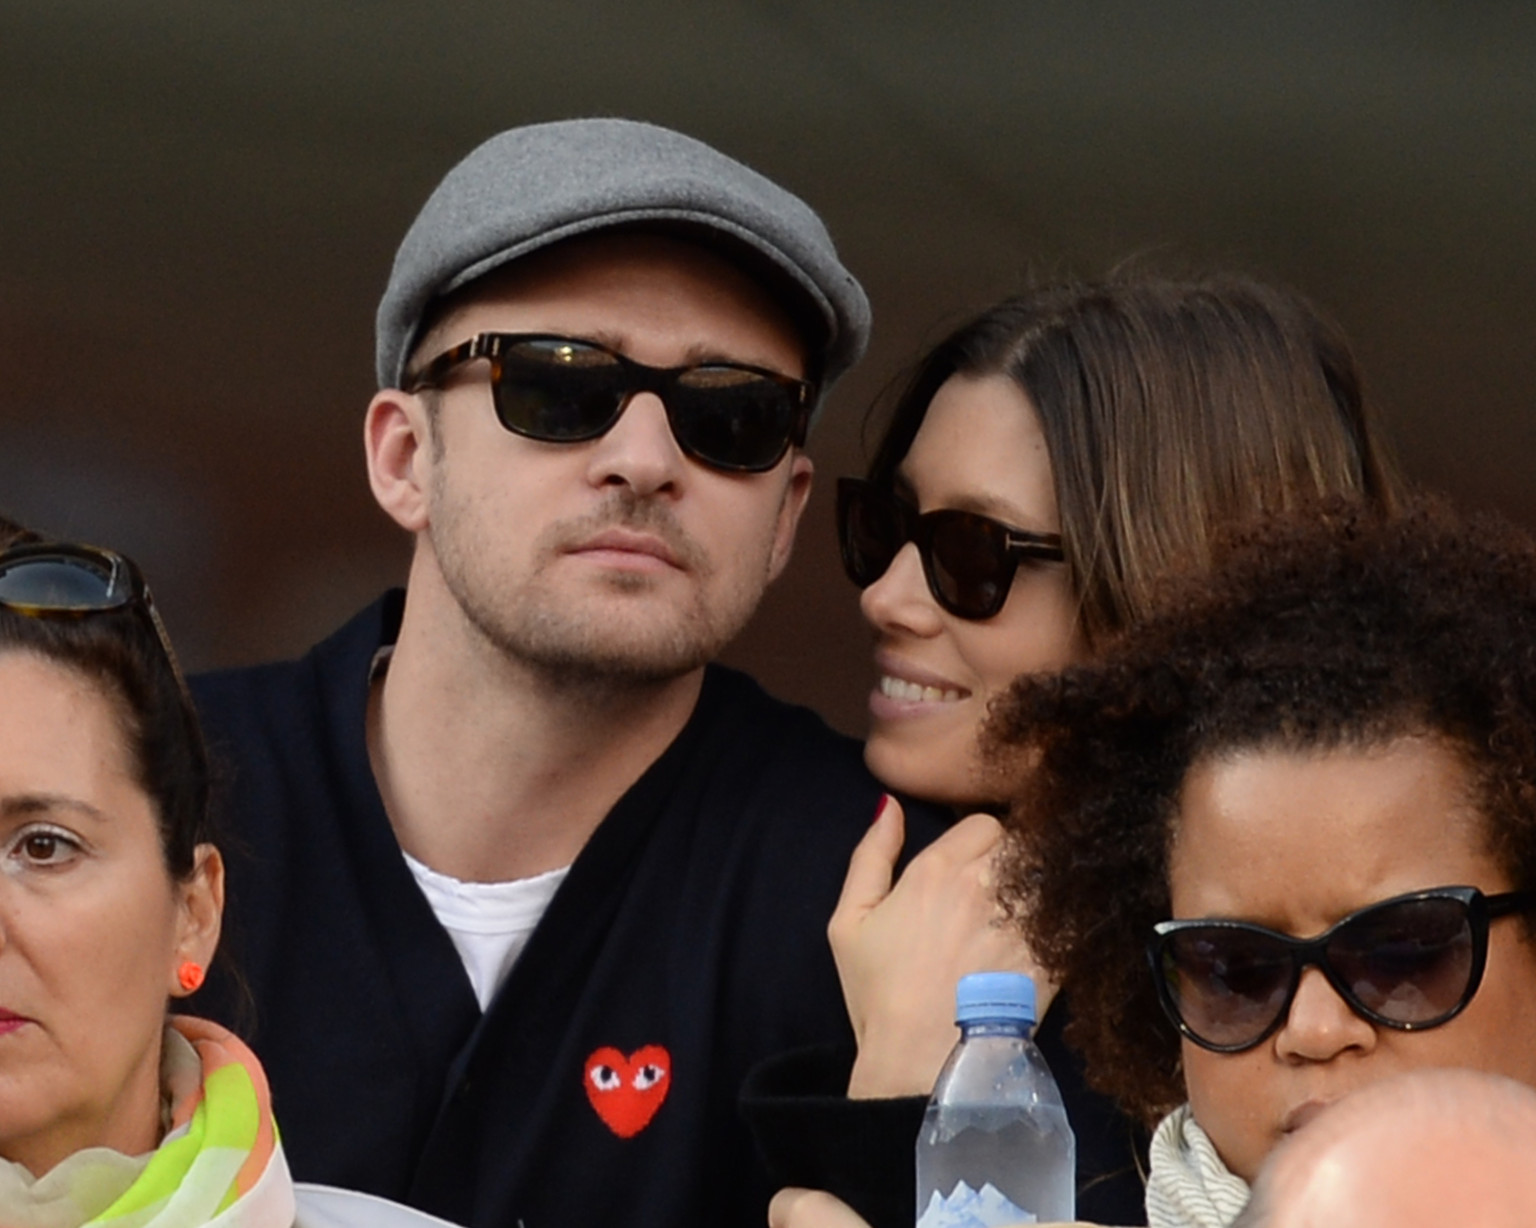 Justin Timberlake And Jessica Biel Share Sweet PDA At The U.S. Open | HuffPost1536 x 1228